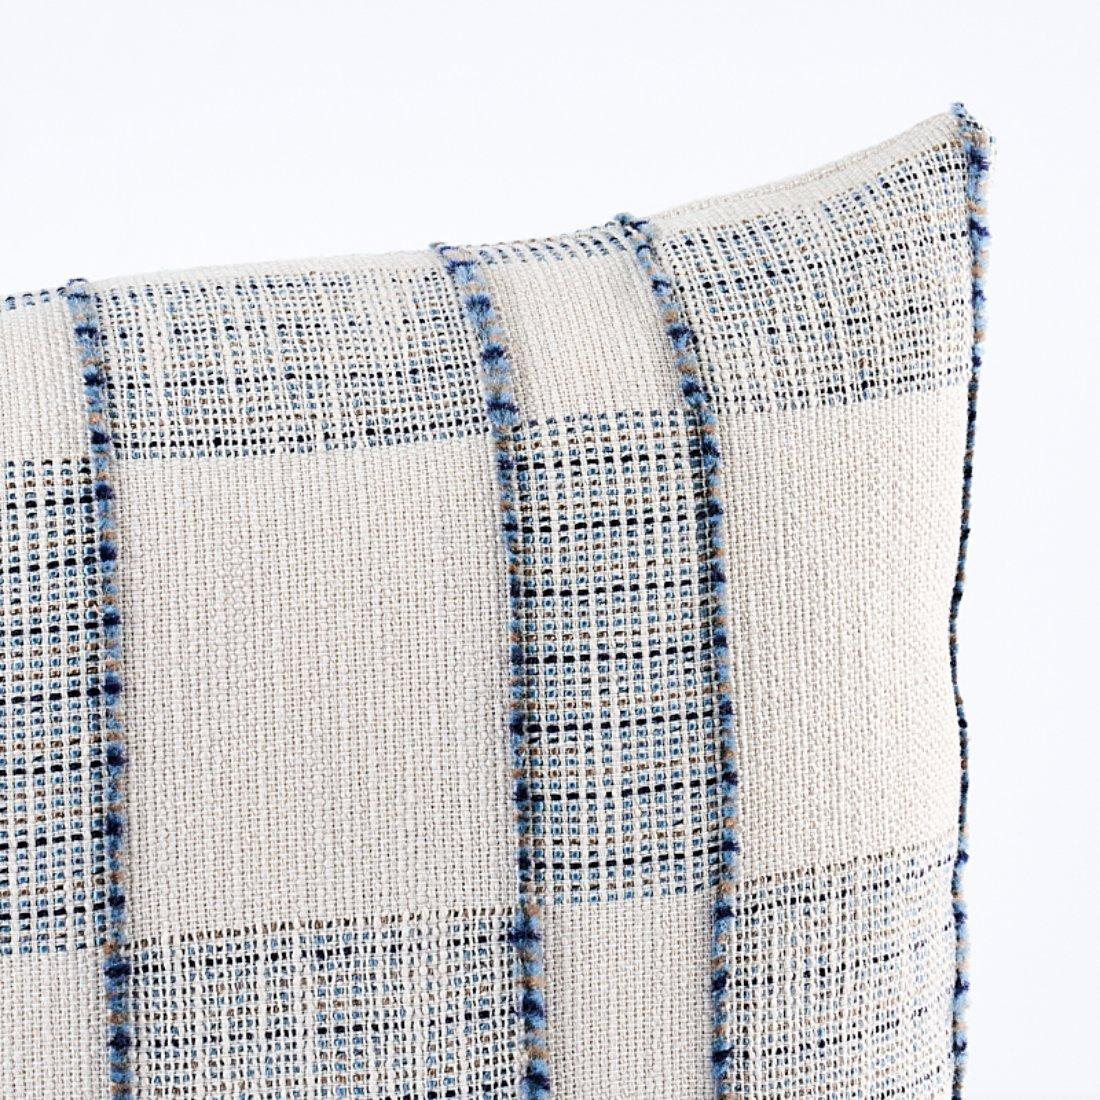 This pillow features Elko Plaid with a knife edge finish. The asymmetrical design and unexpected fringe detailing shows the hand of the maker in this plaid. Pillow includes a feather/down fill insert and hidden zipper closure.

*If out of stock,